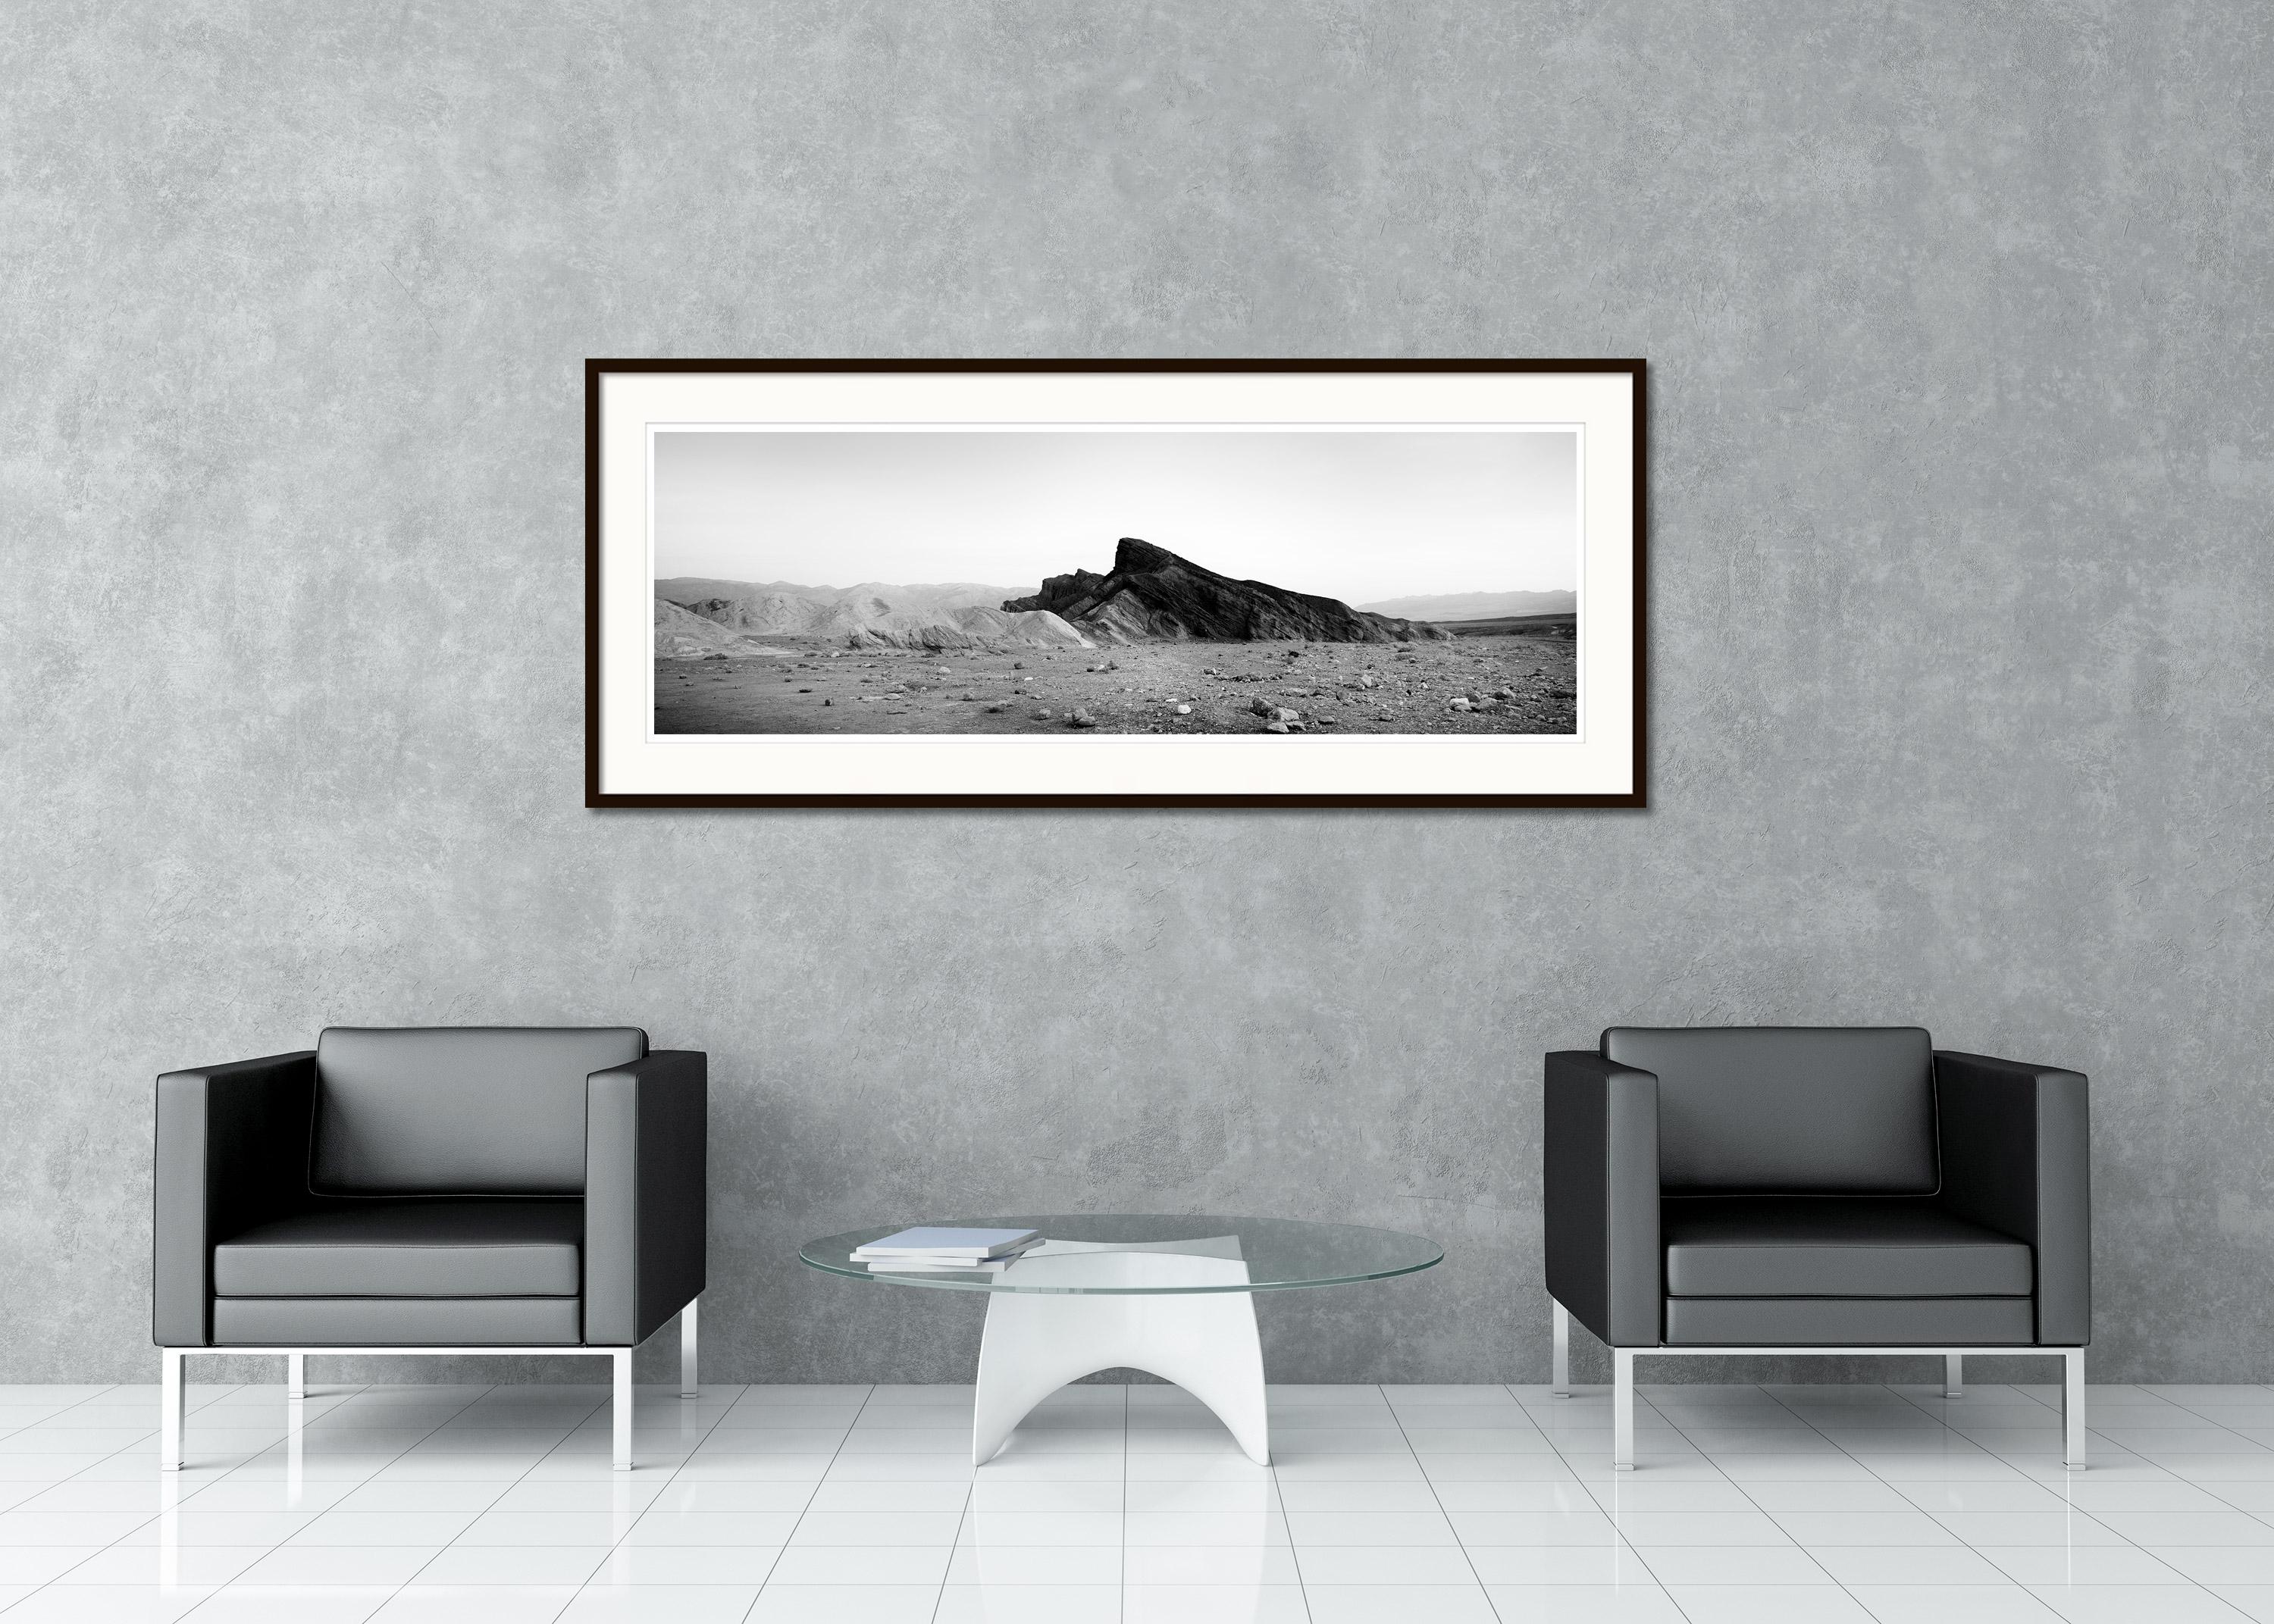 Black and White Fine Art landscape photography. Rock formation in the desert of death valley California, USA. Archival pigment ink print, edition of 9. Signed, titled, dated and numbered by artist. Certificate of authenticity included. Printed with